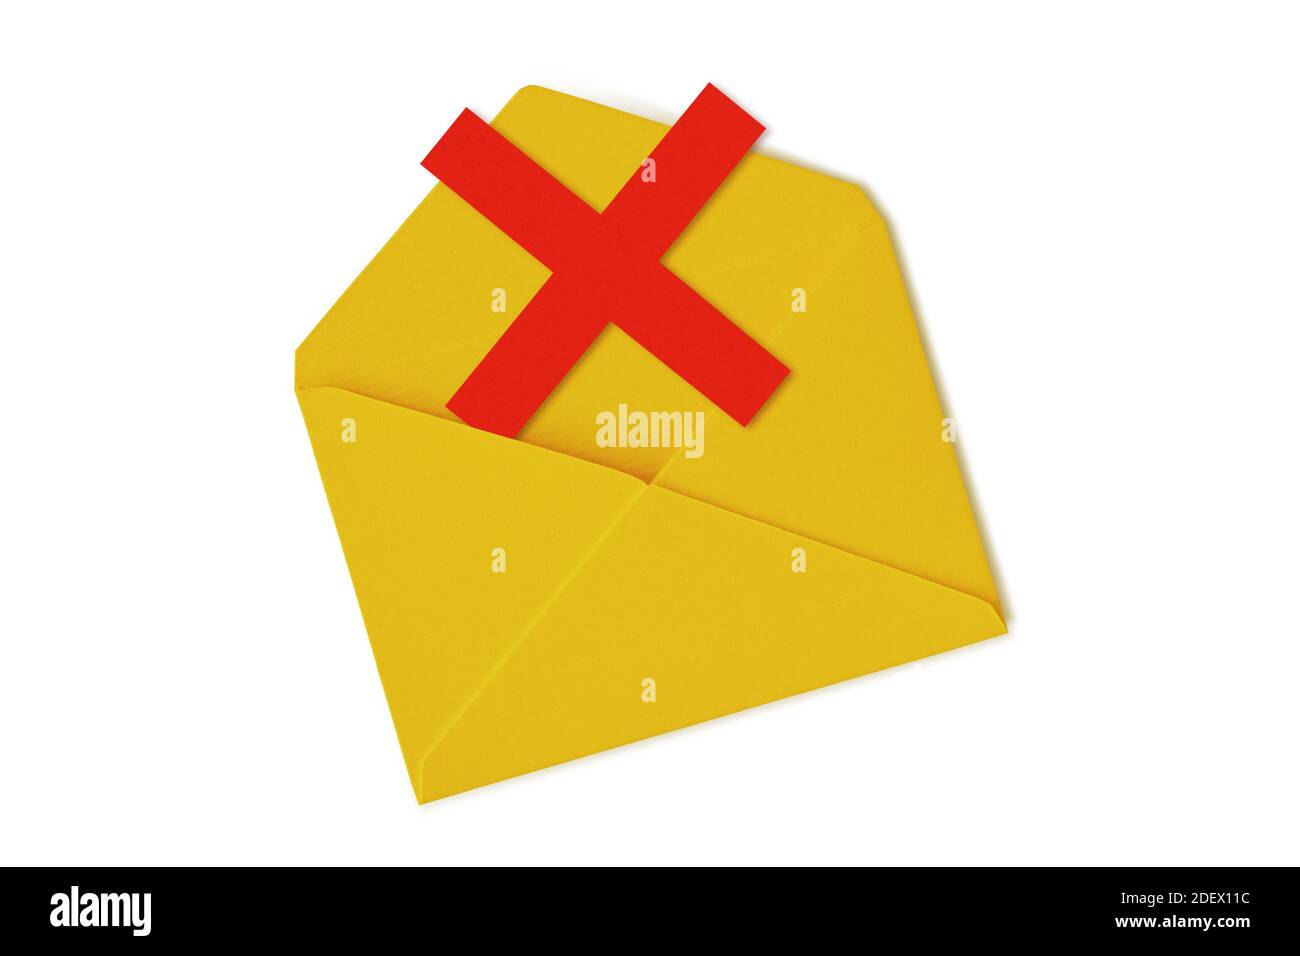 Yellow envelope with red x mark symbol on white background Stock Photo